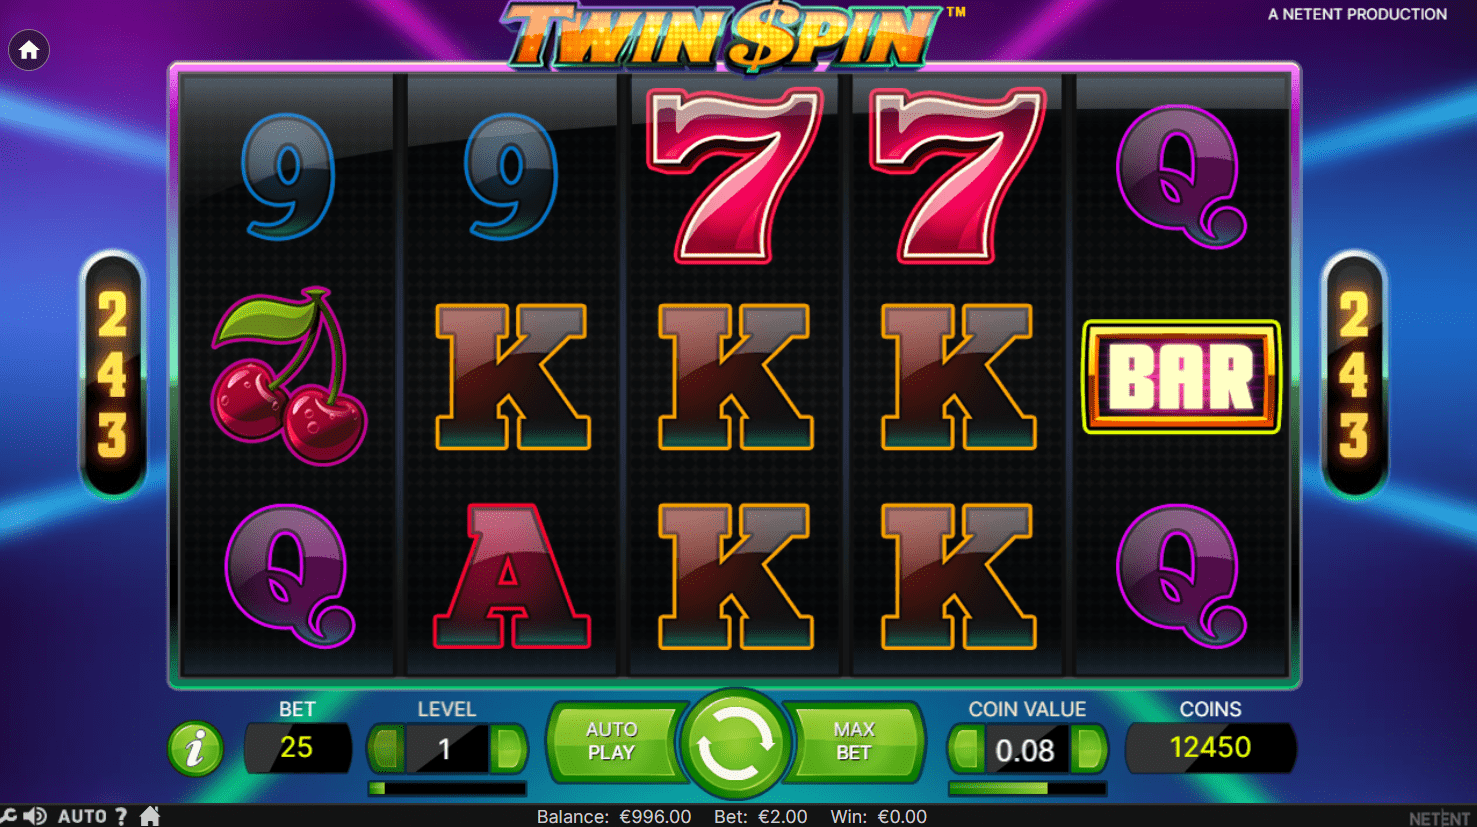 Twin spin download